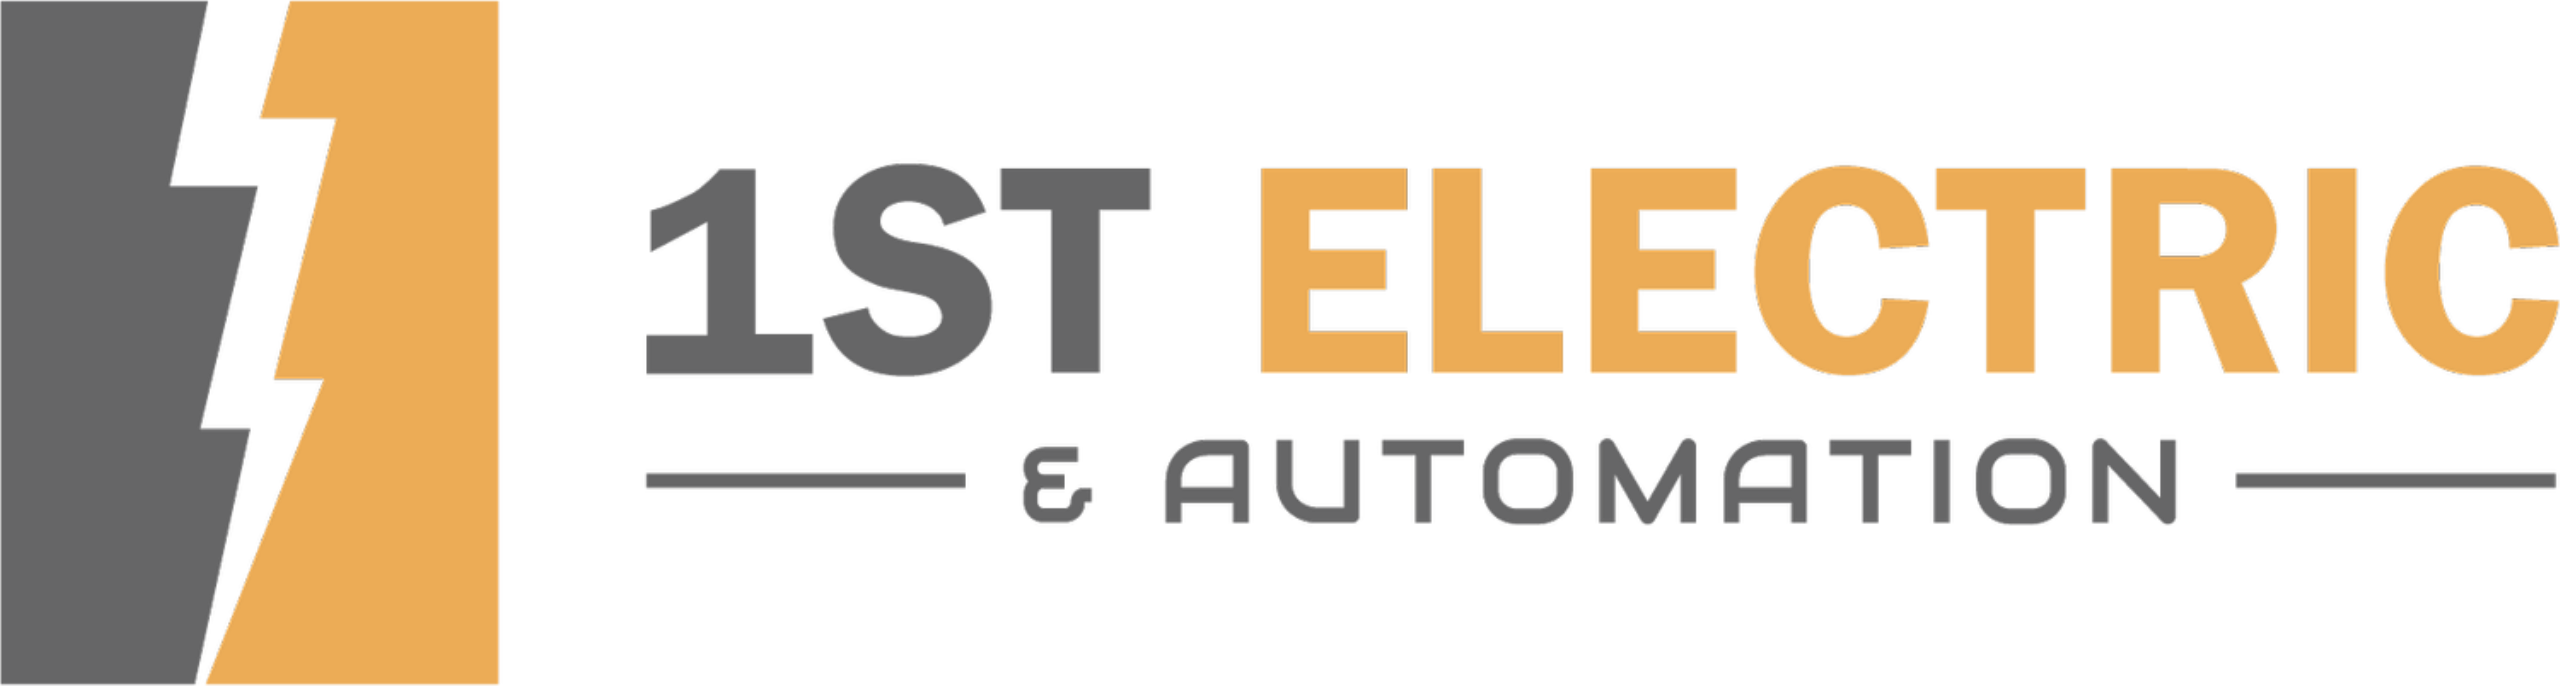 1st Electric and Automation Logo